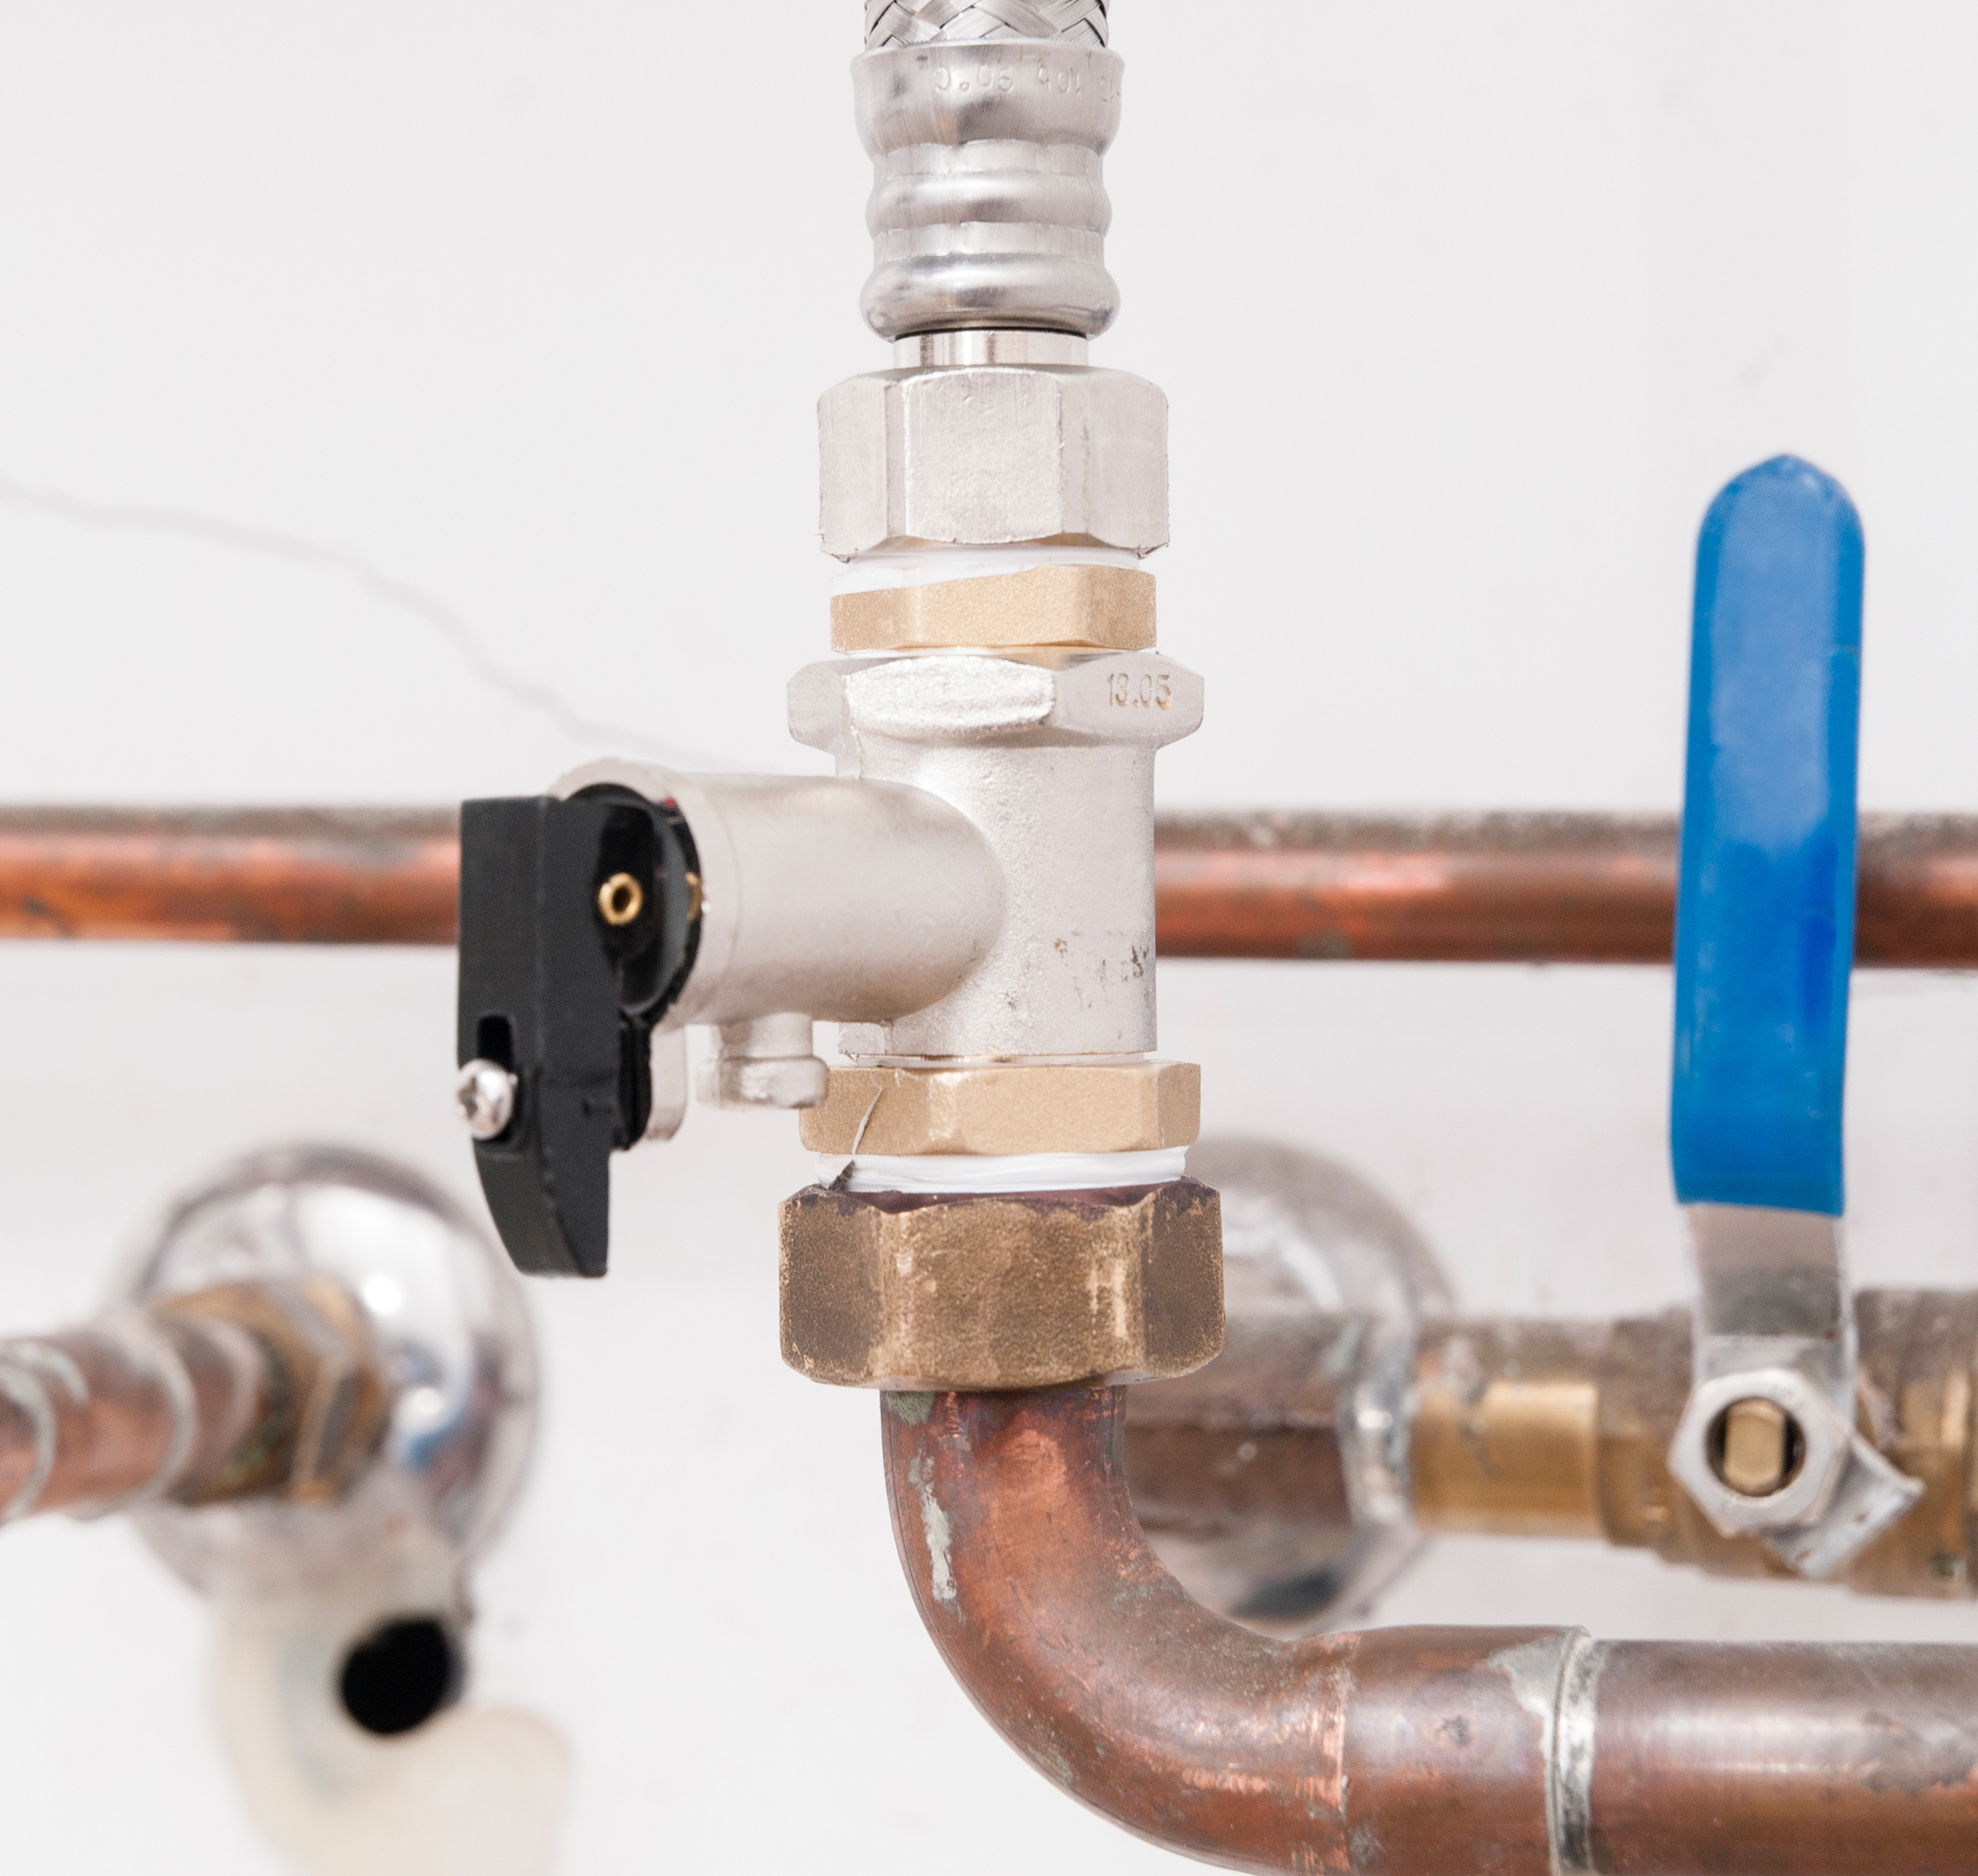 How to Inspect Plumbing Before Buying a Home